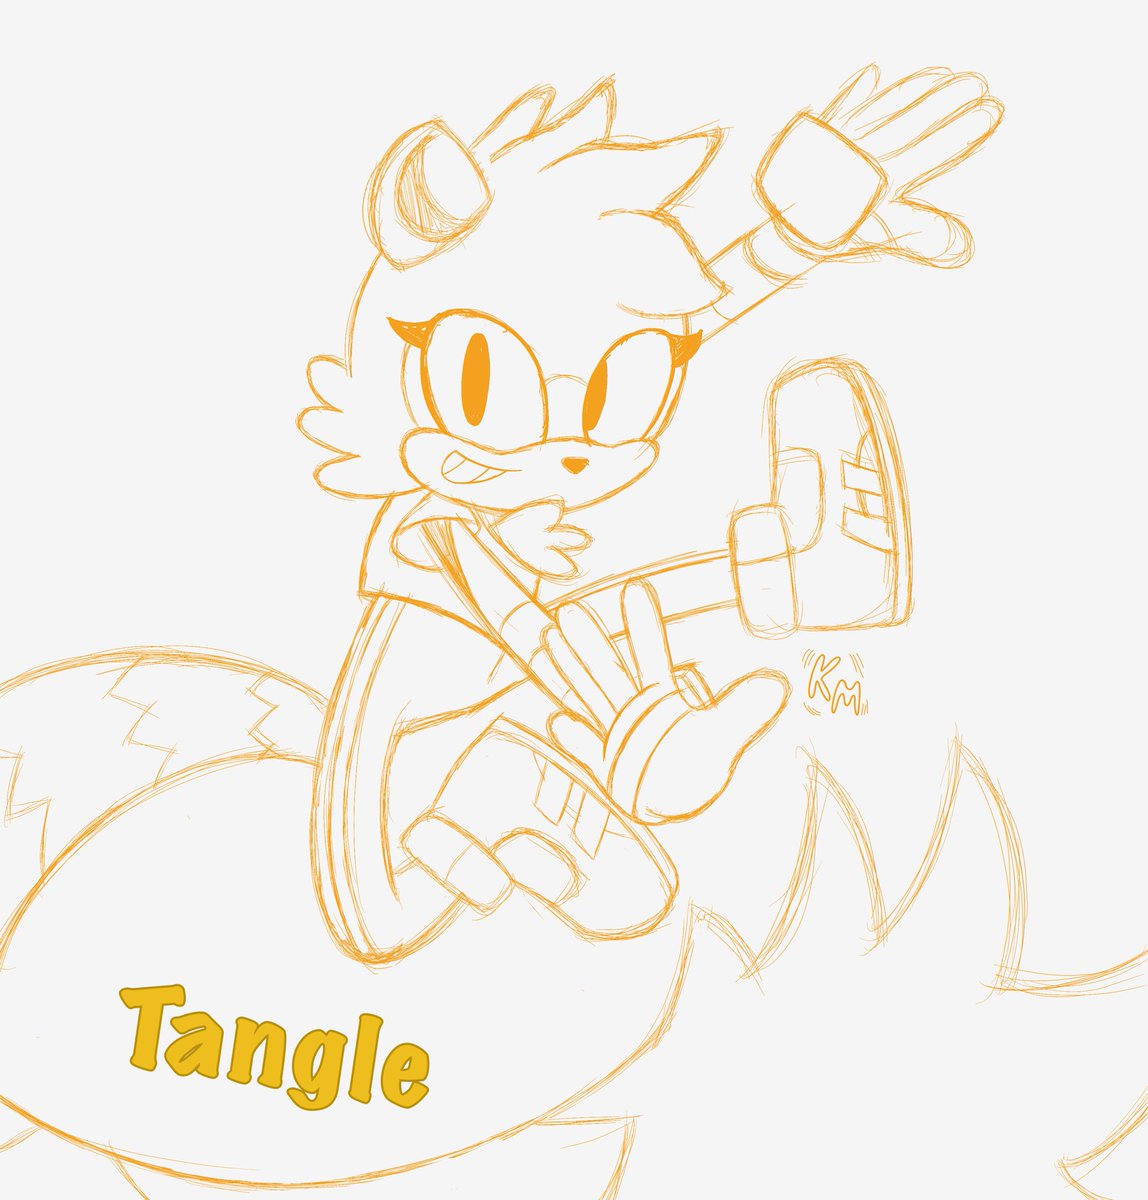 Thought I’d draw the Lemur for today…
#TangletheLemur #SonictheHedgehog #SonicIDW #Sonicfanart